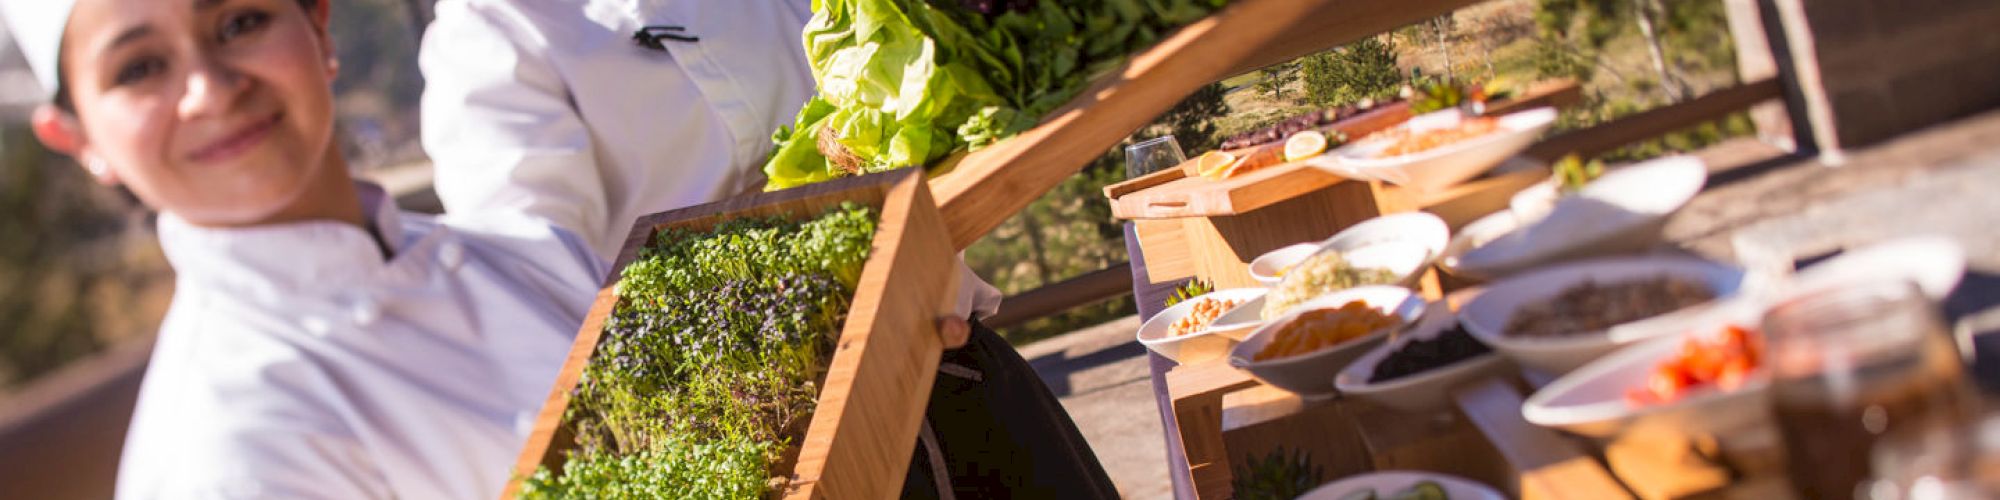 Two chefs presenting a variety of fresh vegetables and herbs at an outdoor table set with various ingredients.